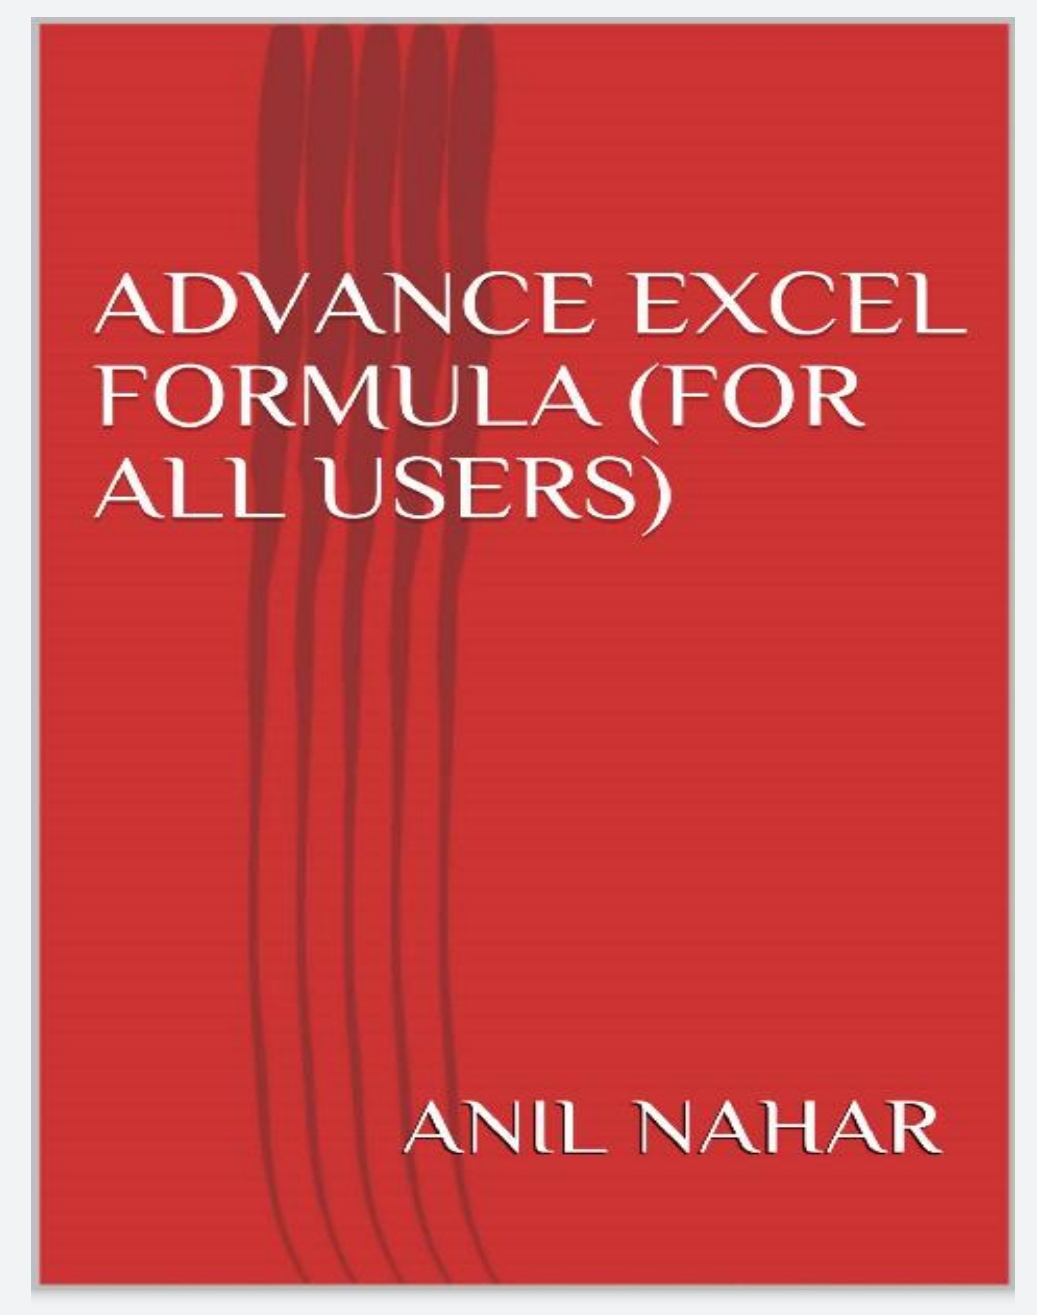 free-ebook-advance-excel-formula-for-all-users-ready-to-use-customize-function-by-anil-nahar